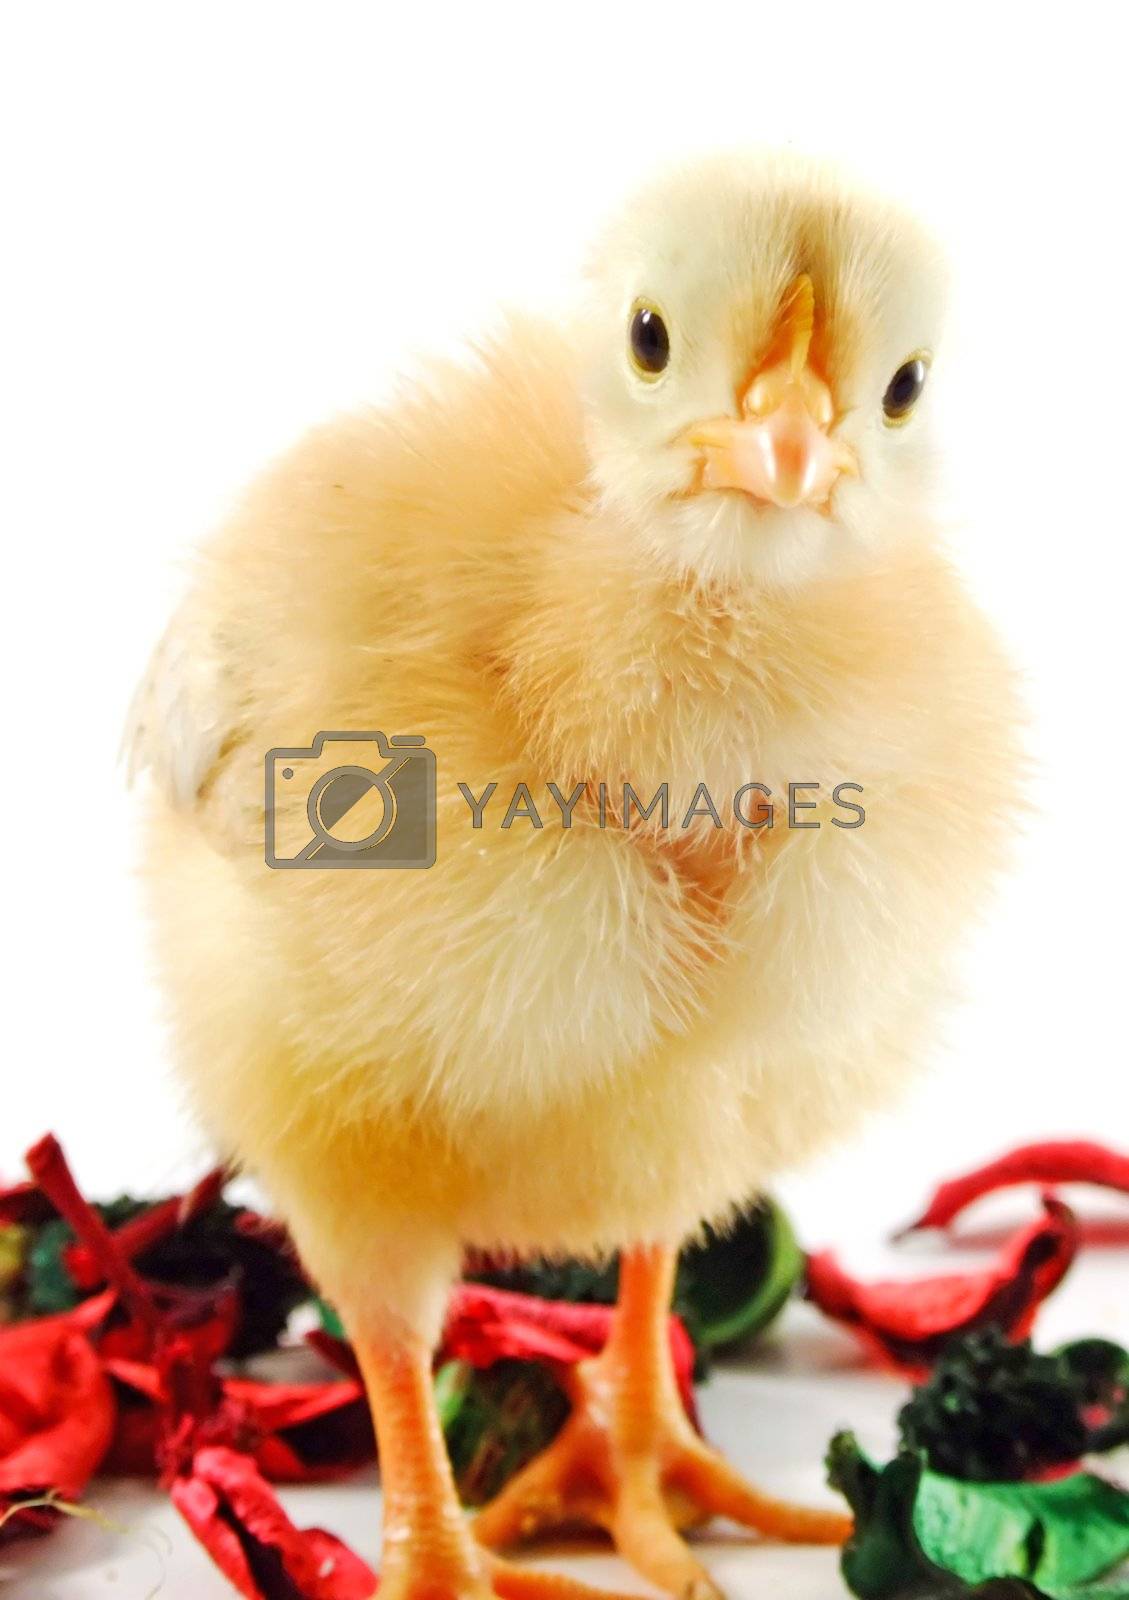 Royalty free image of Baby chicken by PauloResende